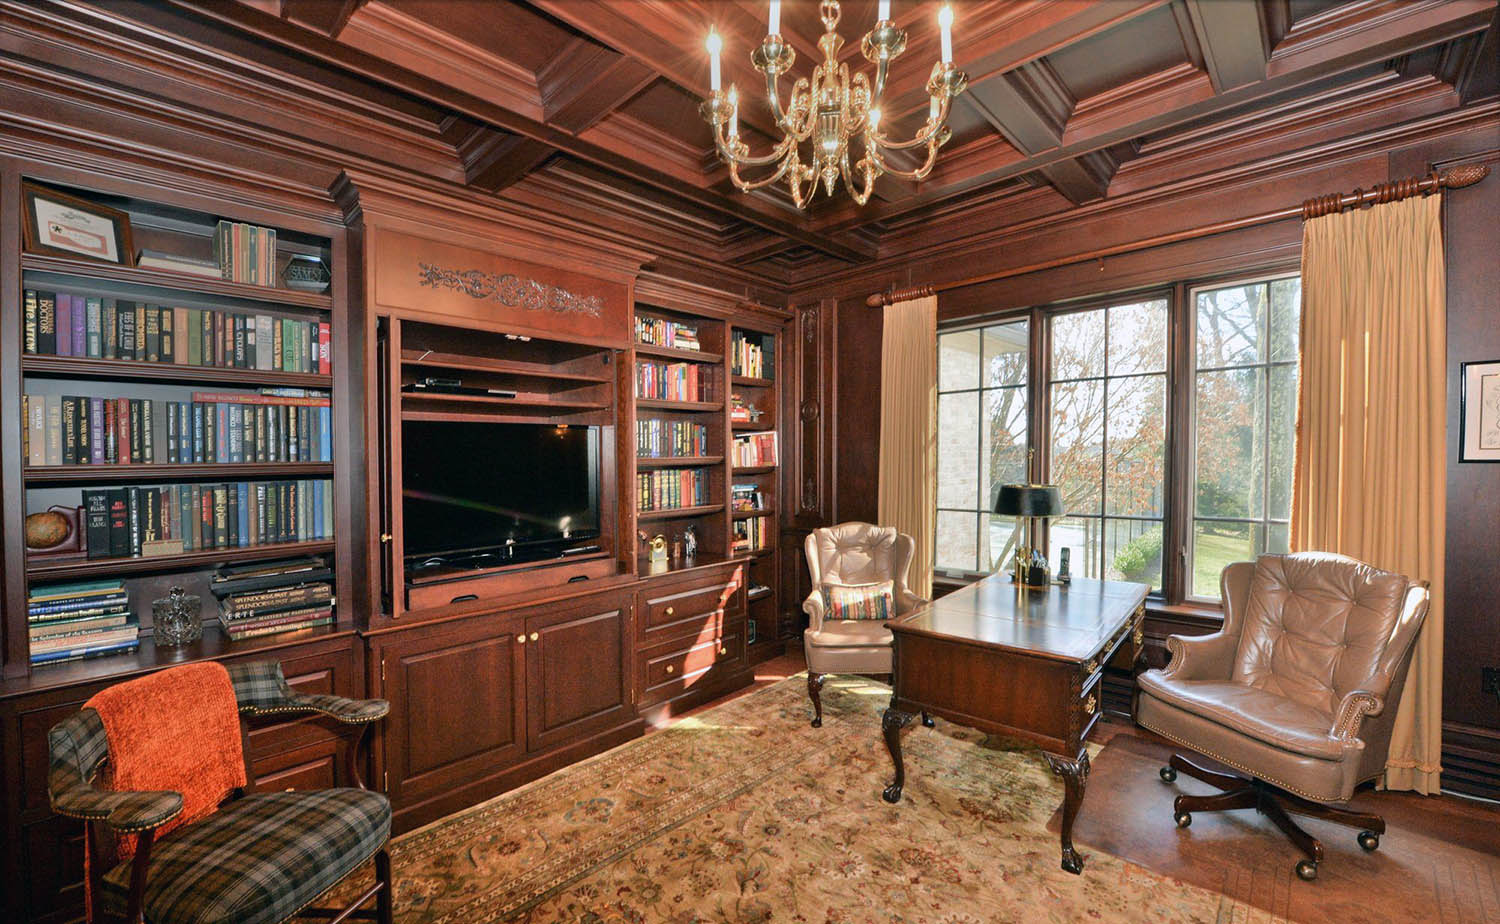 Home office with medium brown stained all wood walls, coffered ceiling and built ins. Hardwood floors.